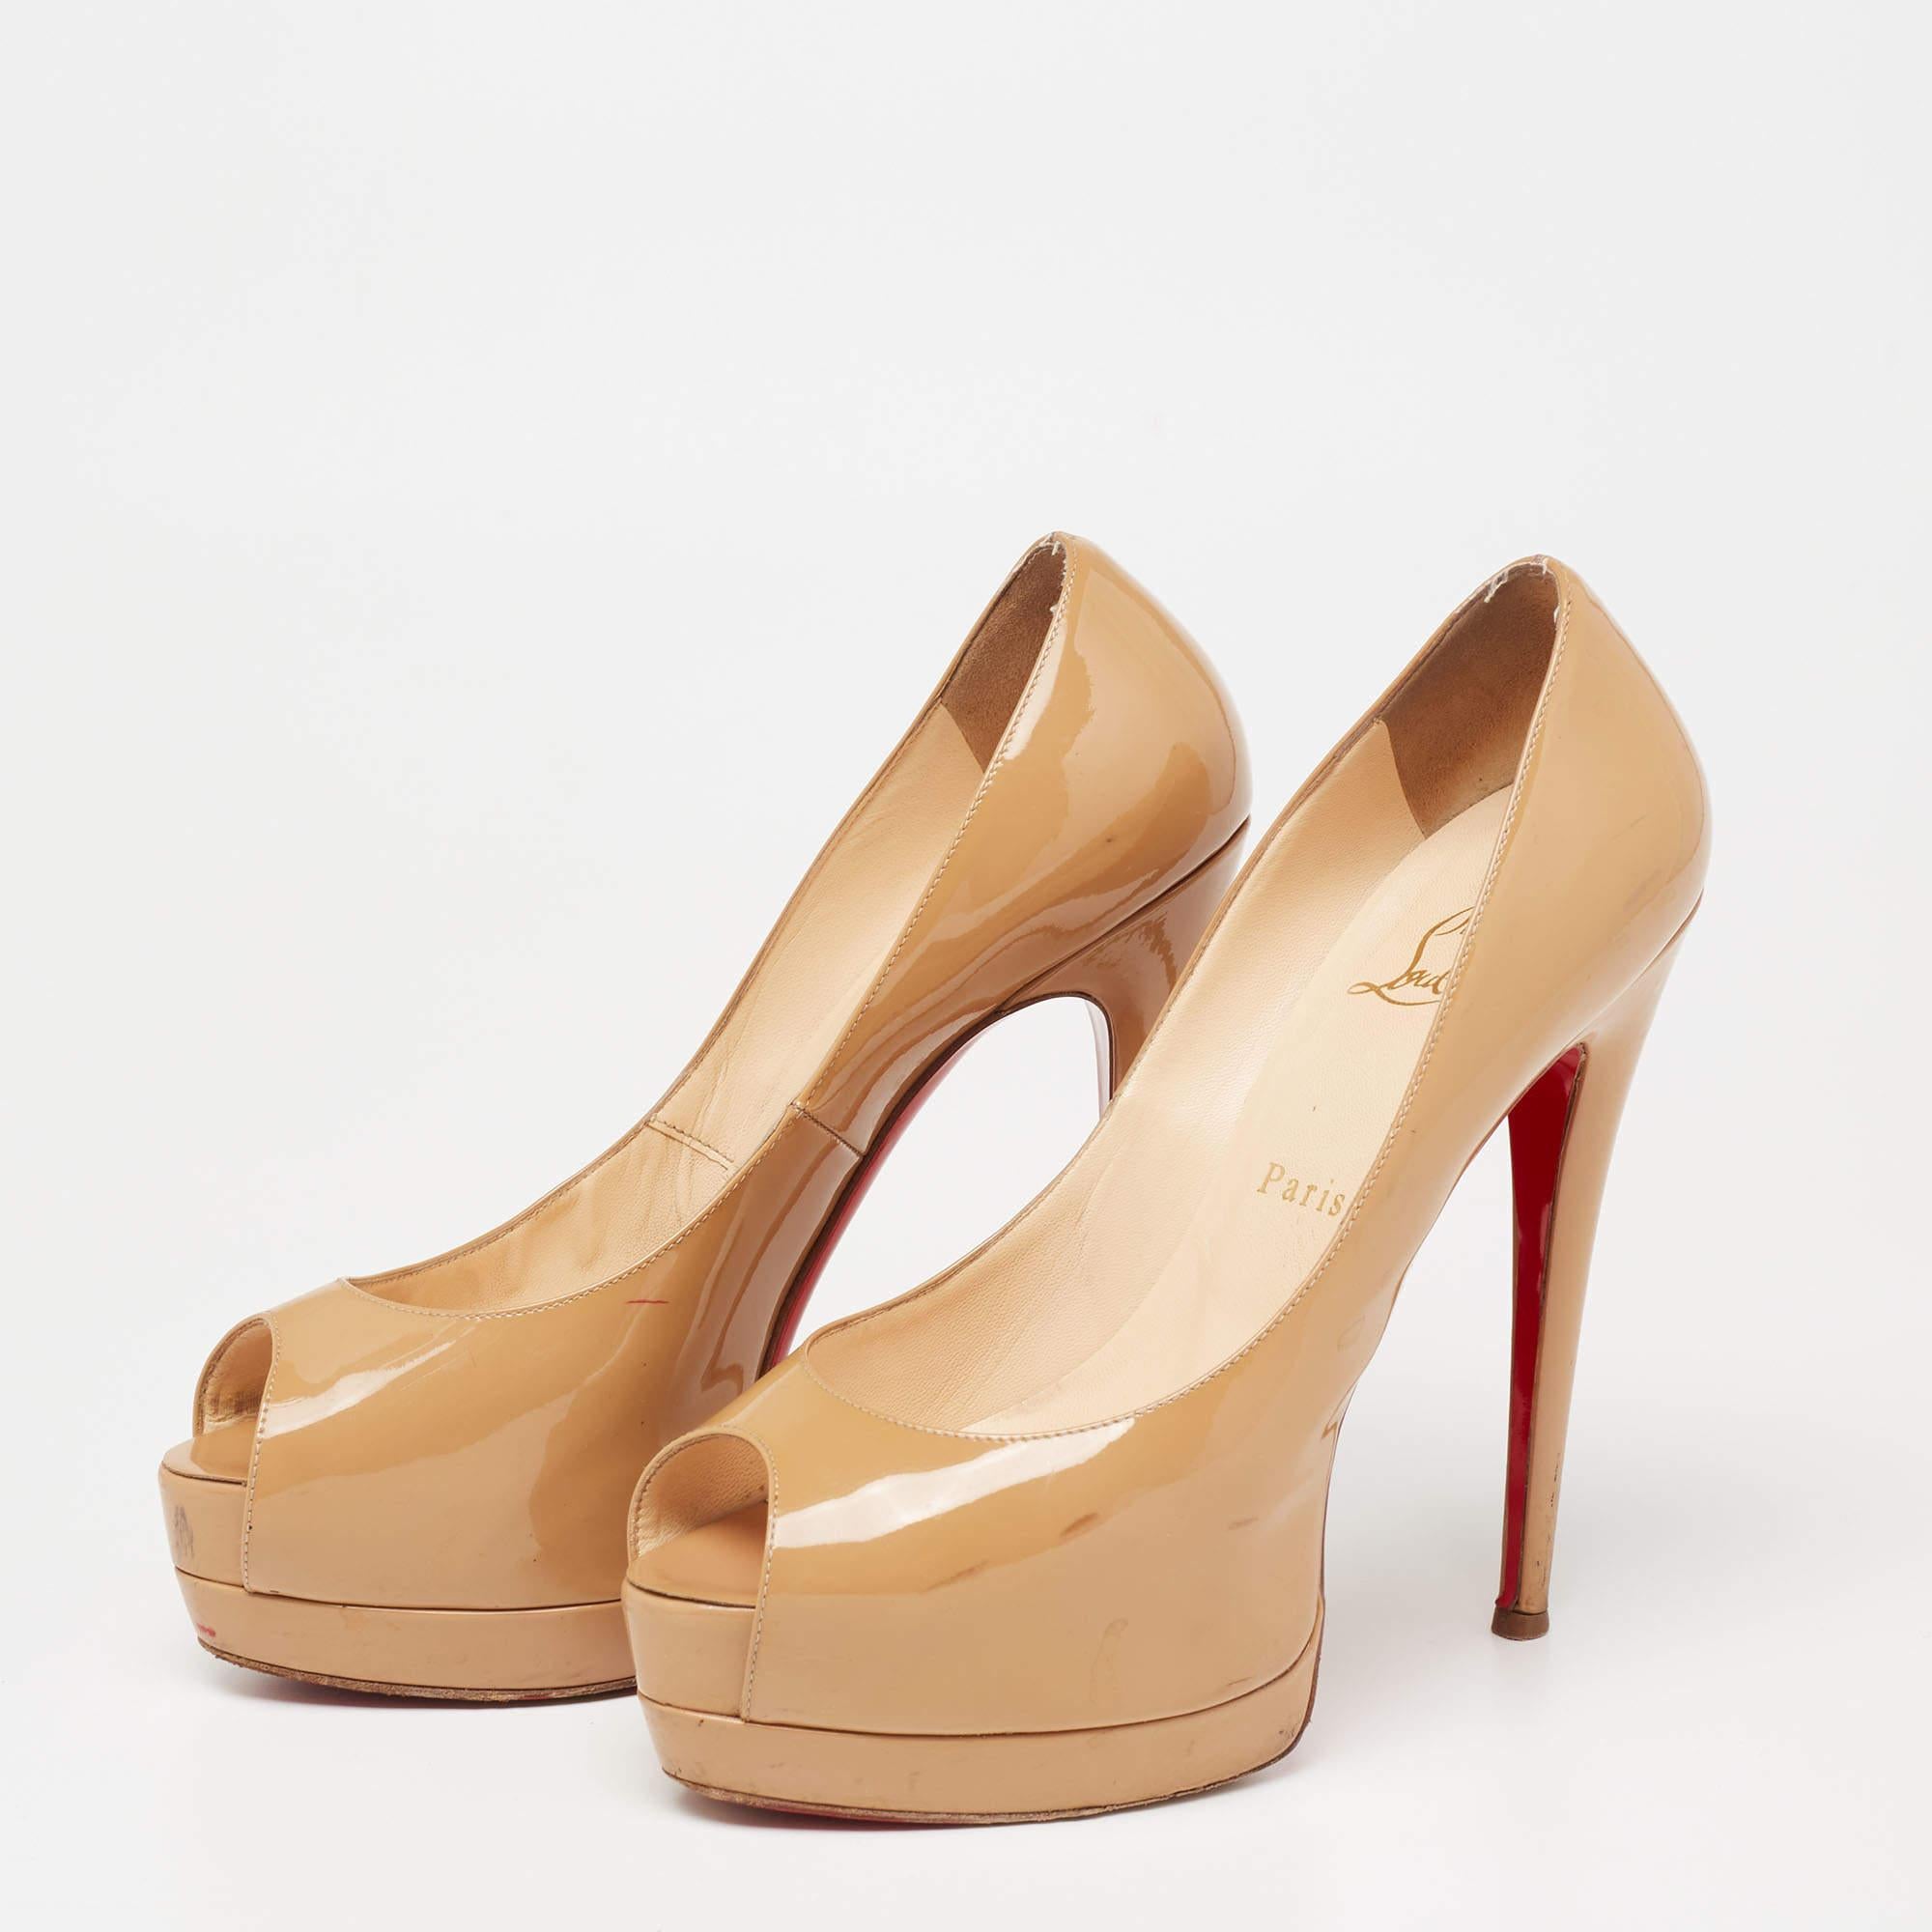 These pumps from Christian Louboutin are meant to be a loved choice. Wonderfully crafted from patent leather, and balanced on low platforms and 14 cm heels, the beige pumps are high in both style and comfort.

